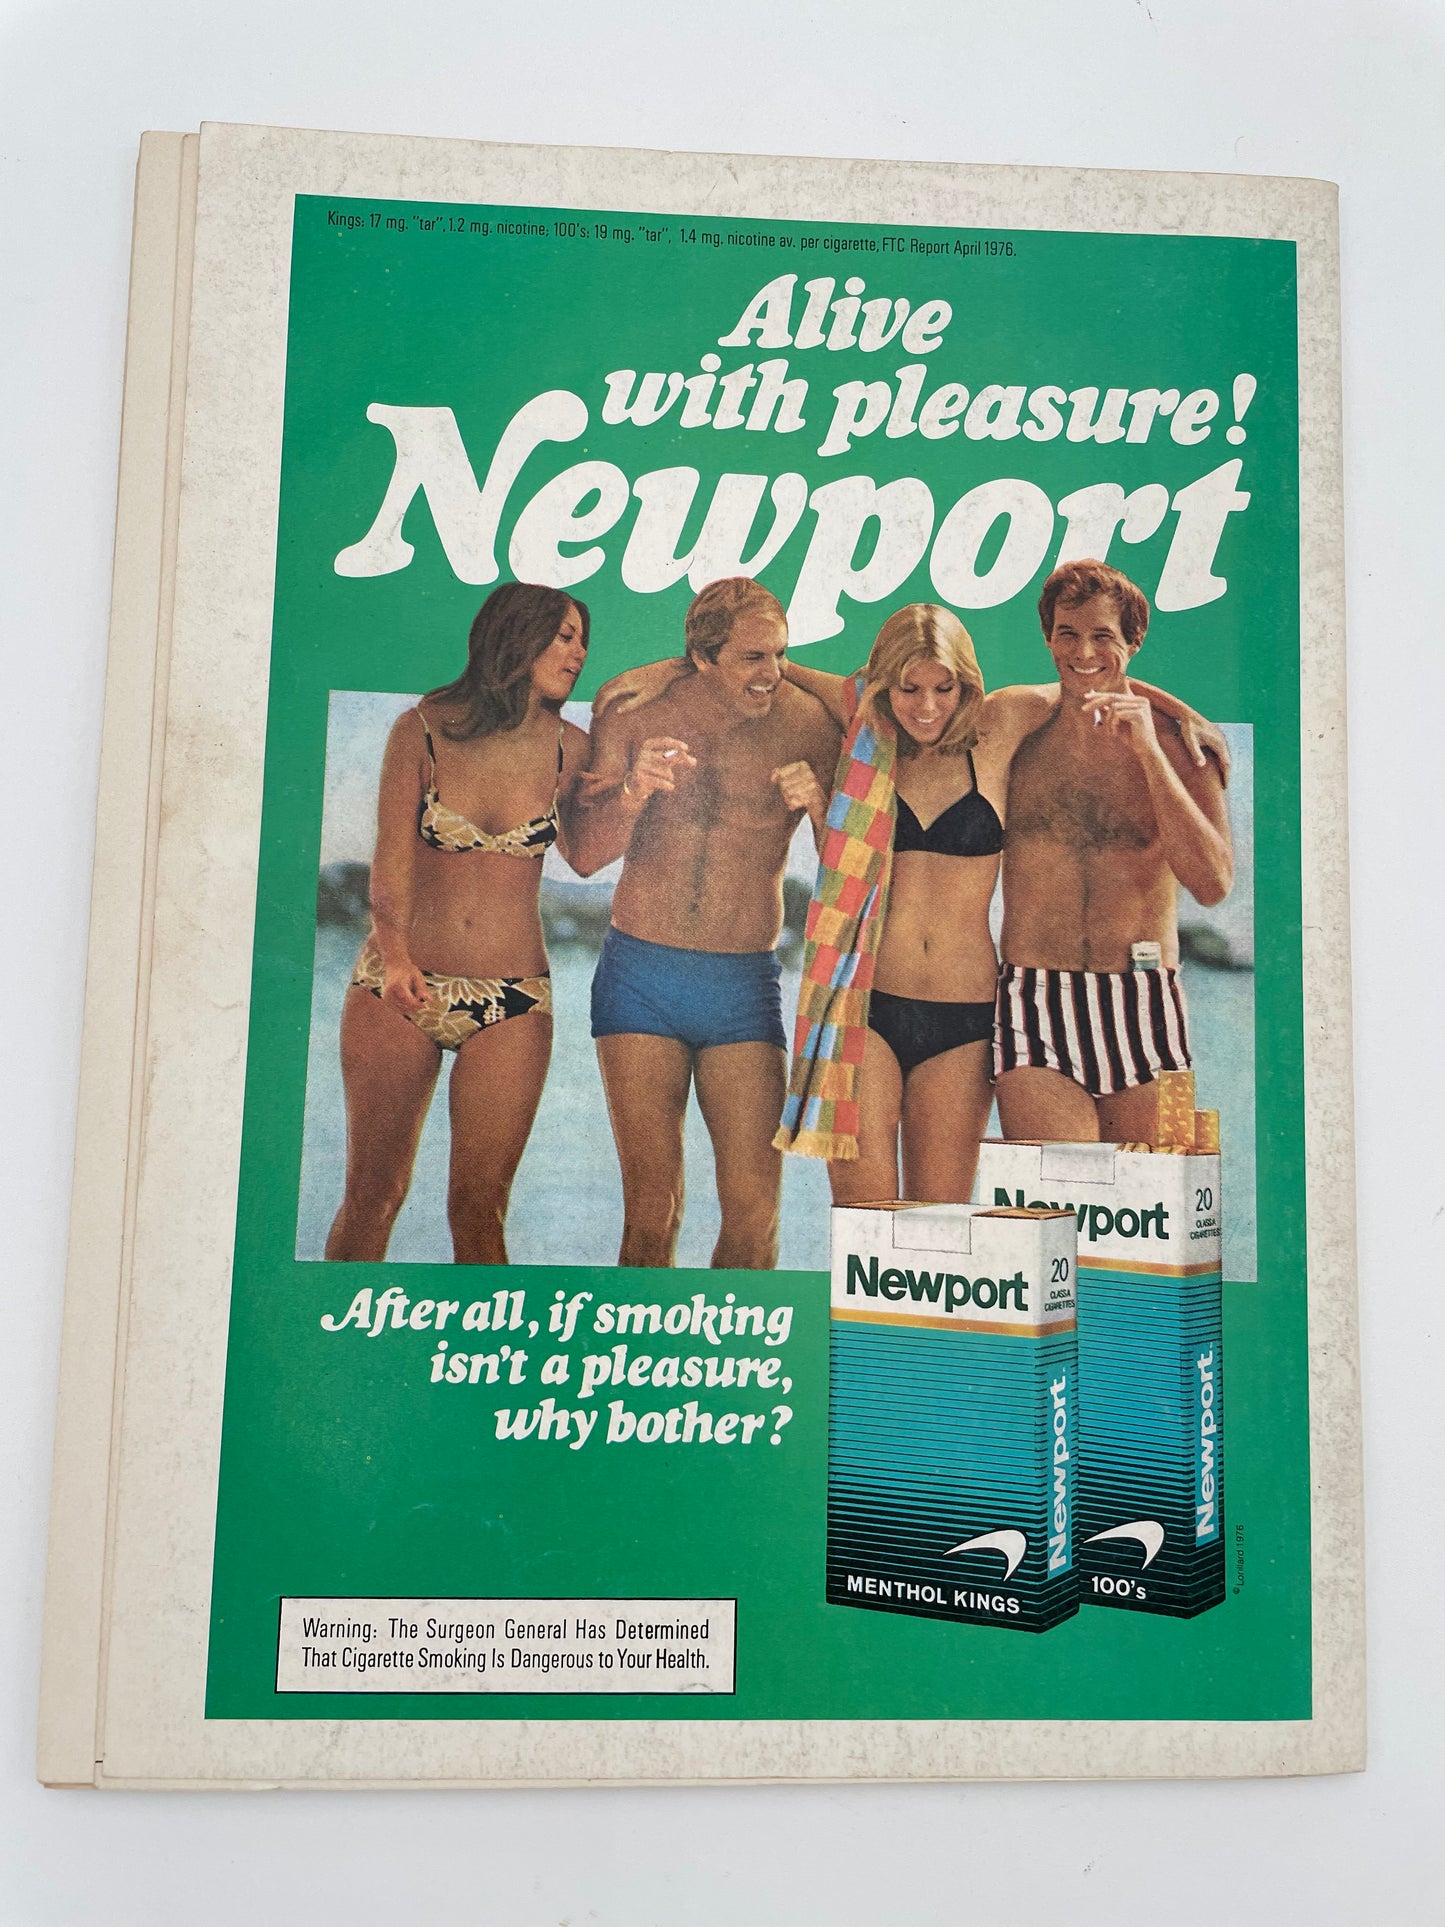 National Lampoons Magazine - Compulsory Summer Sex Issue - August 1976 #101758